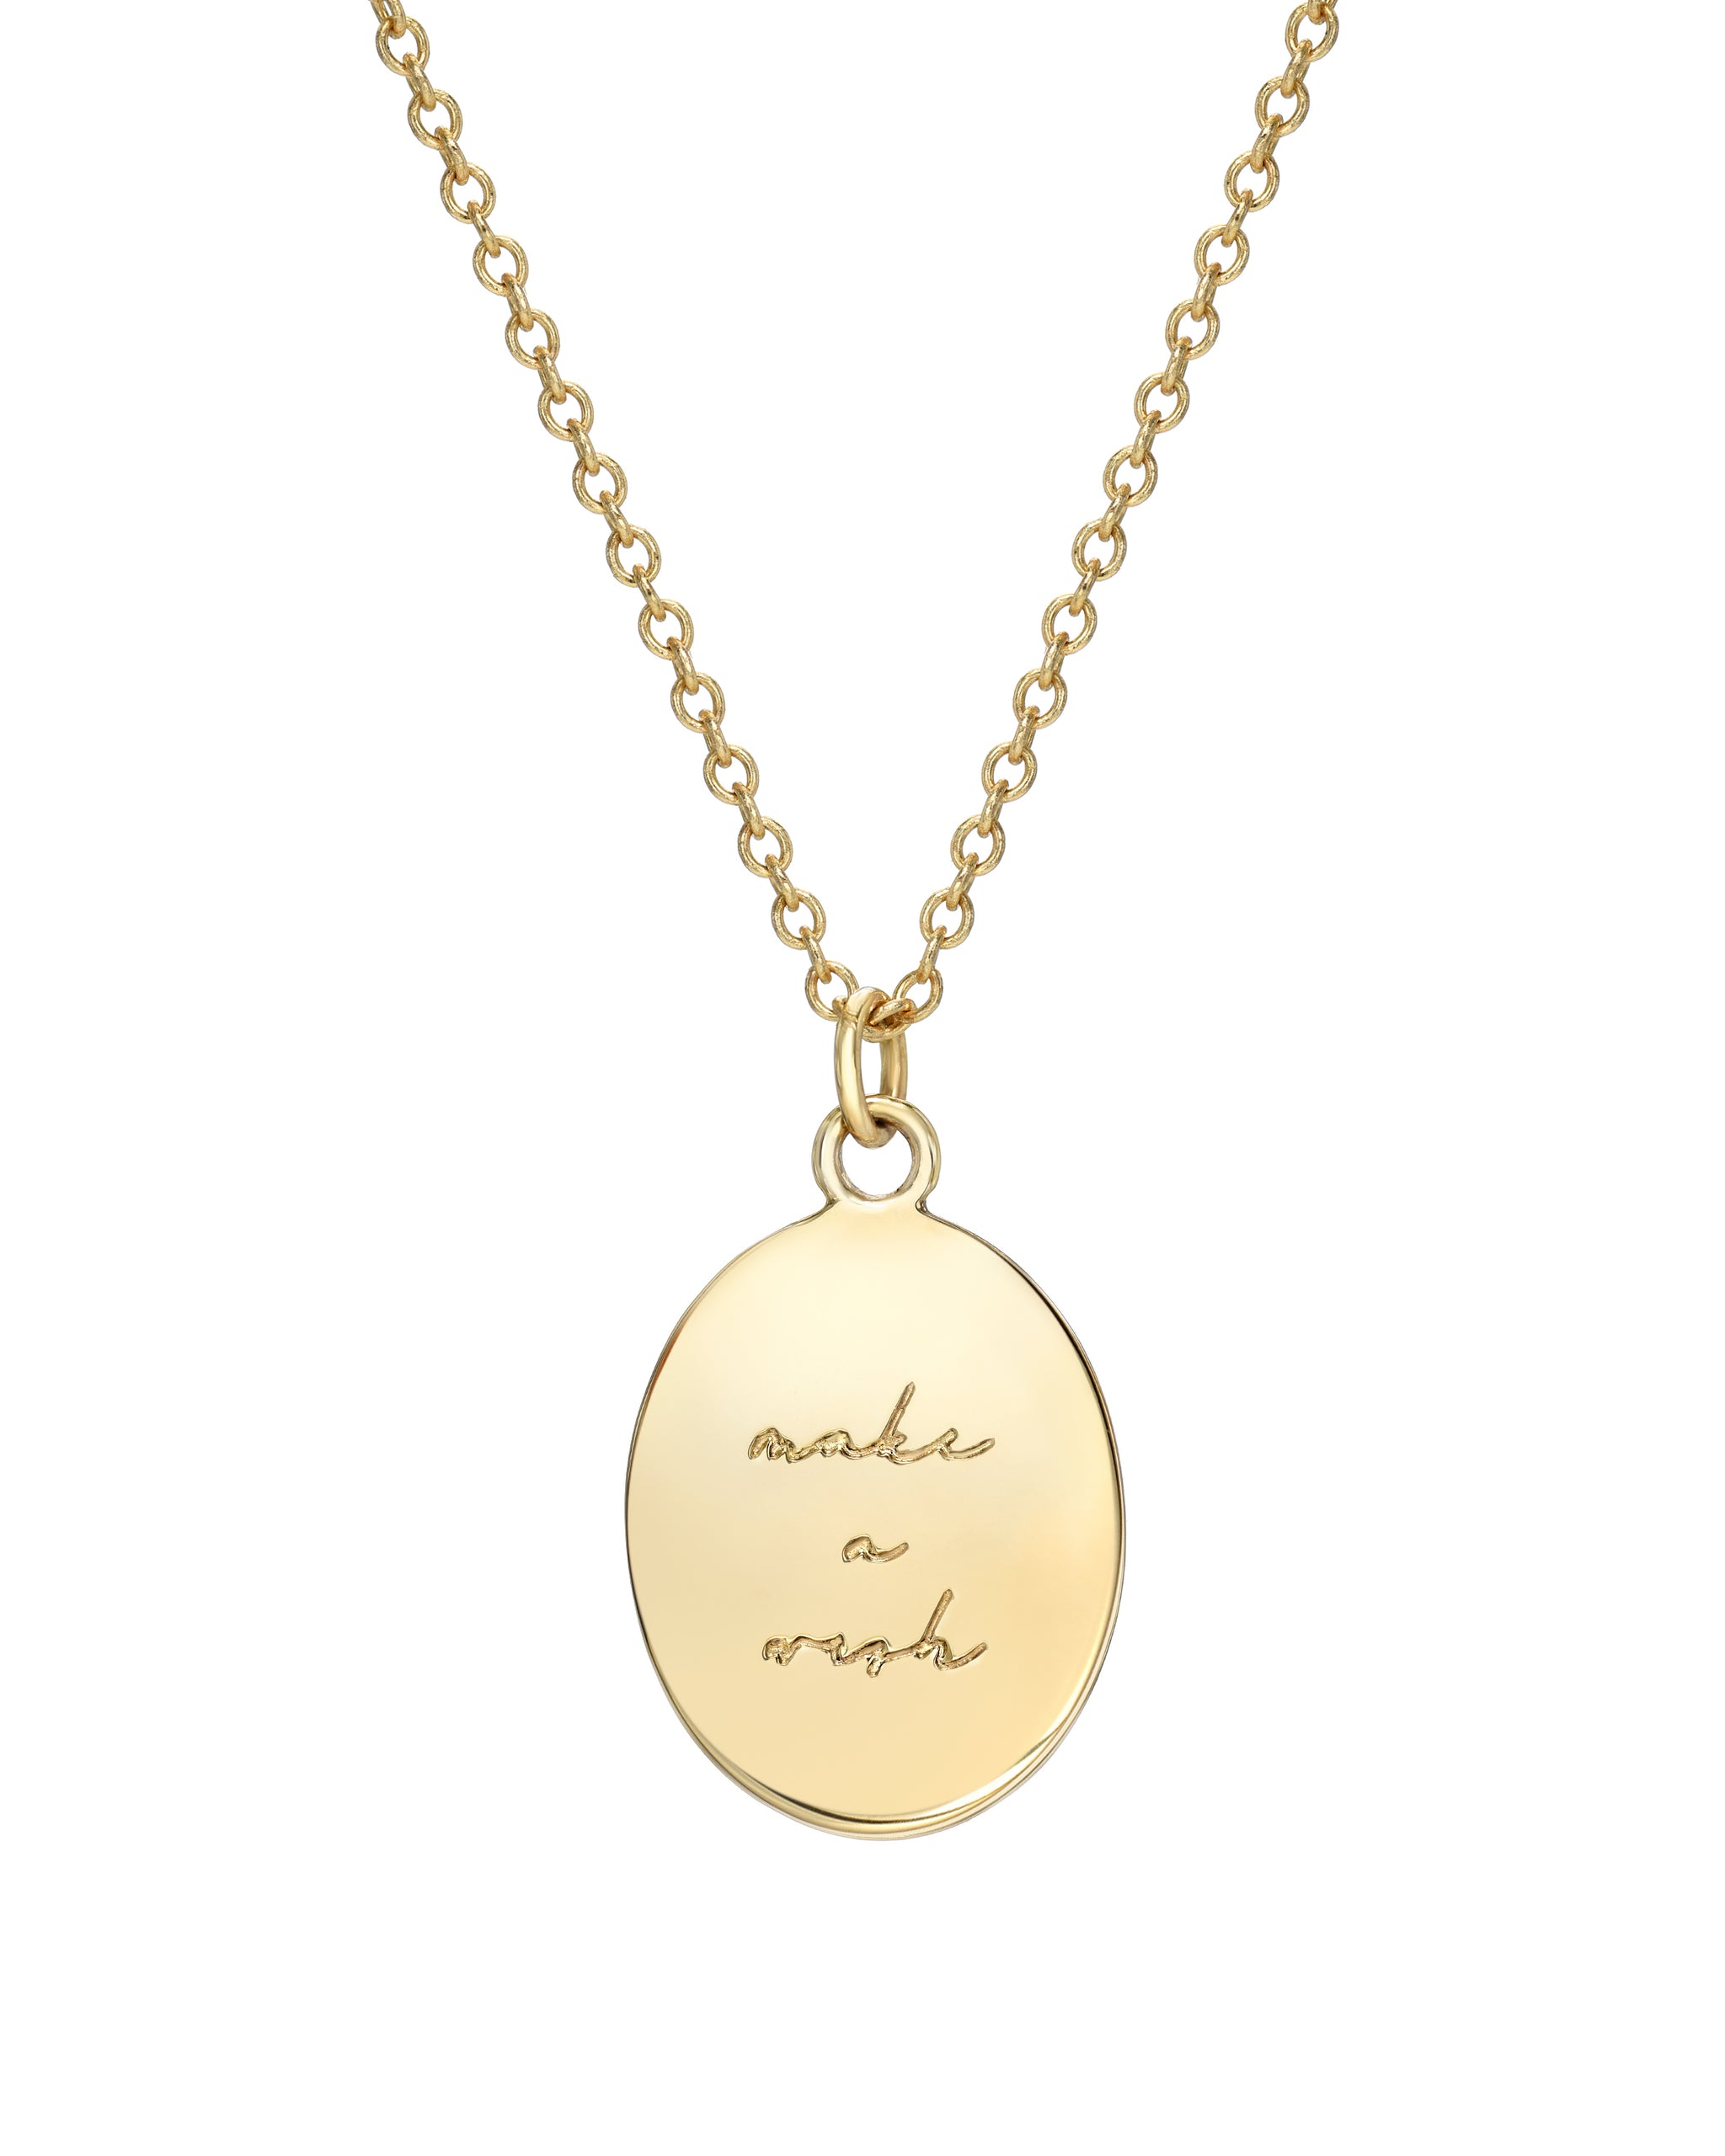 11:11 Necklace, Oval Medallion with 11:11 engraved and two 1mm semi-precious stones, "make a wish" engraved on the back, 14k gold vermeil, handmade by Turquoise + Tobacco in Los Angeles, California 